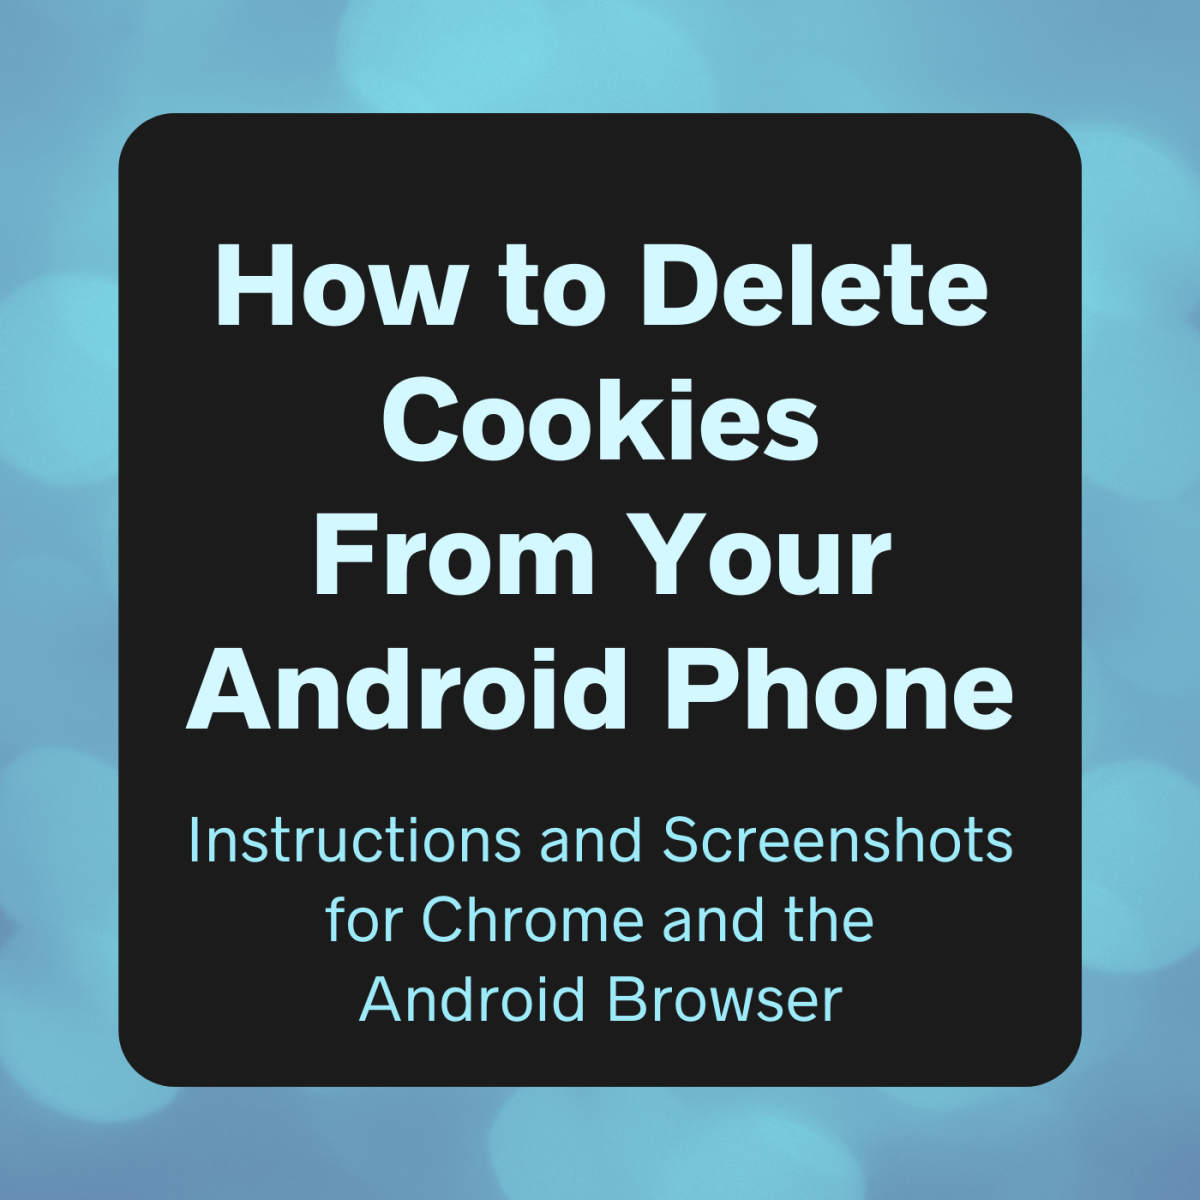 Learn how to delete cookies from your phone with the Chrome browser and the older Android browser.